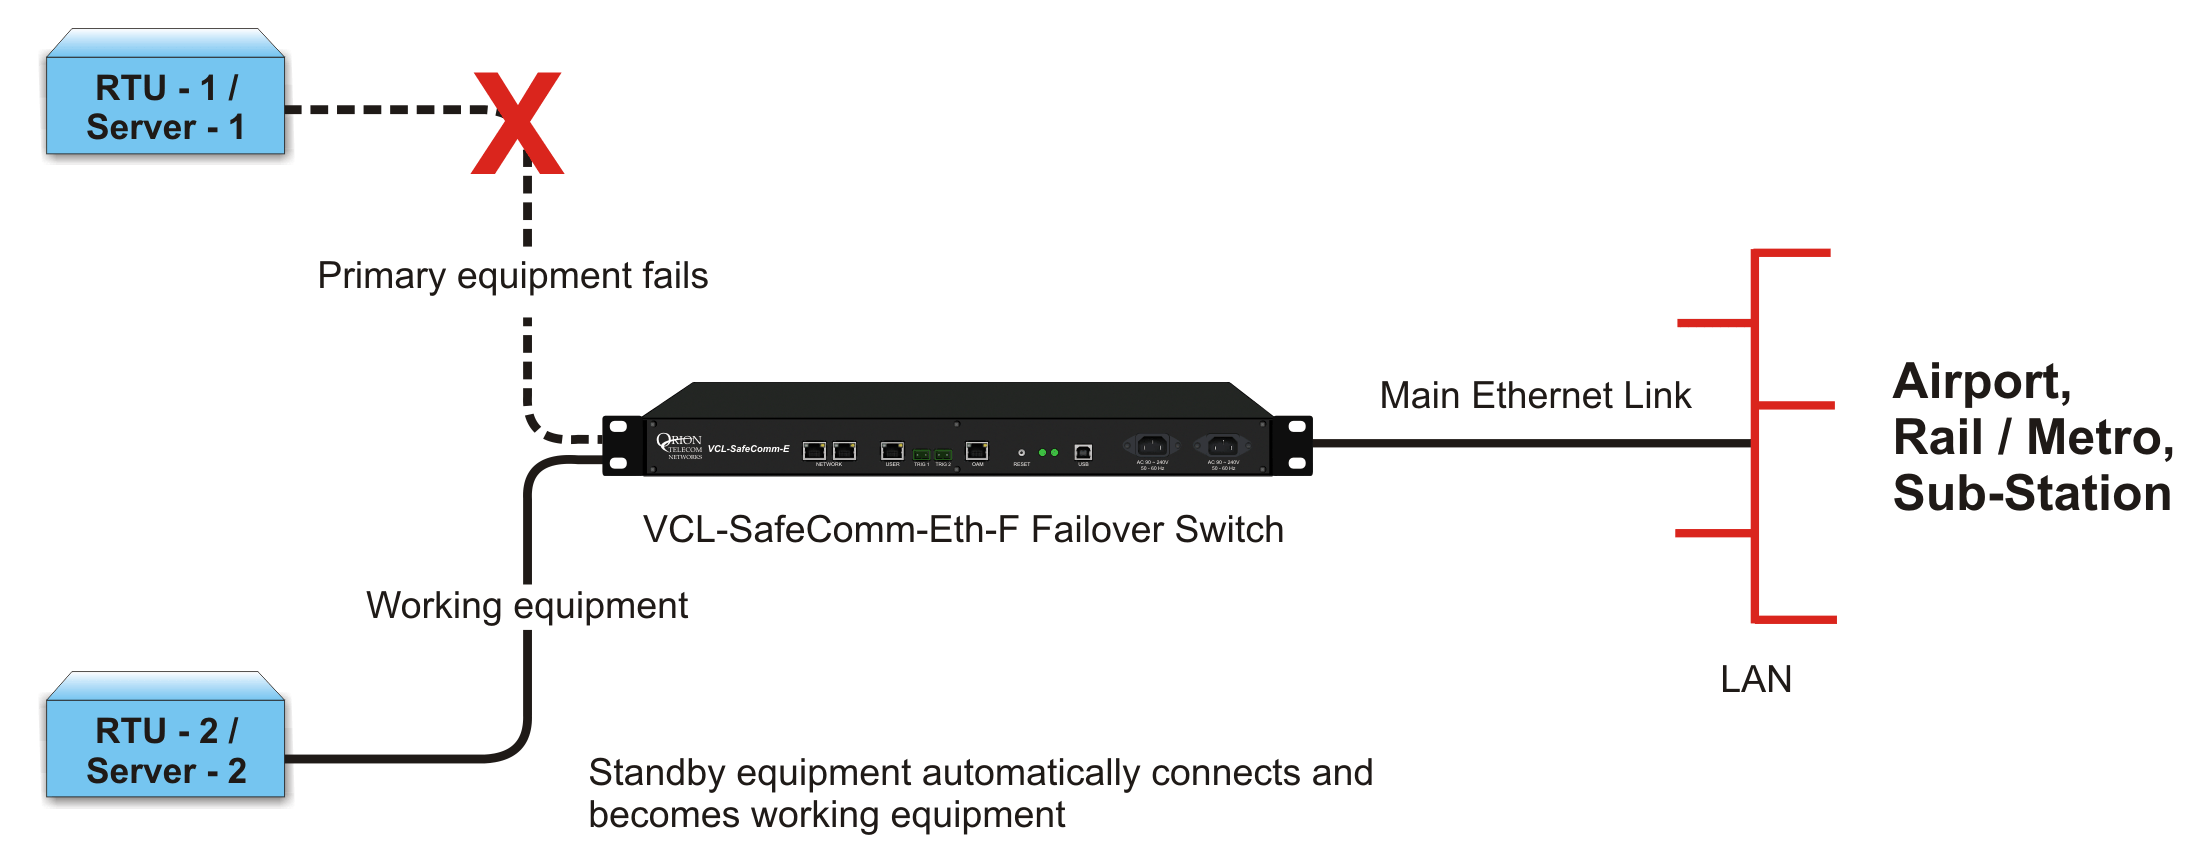 Equipment 1 fails. Ethernet link automatically switches to RTU-2 / Server-2